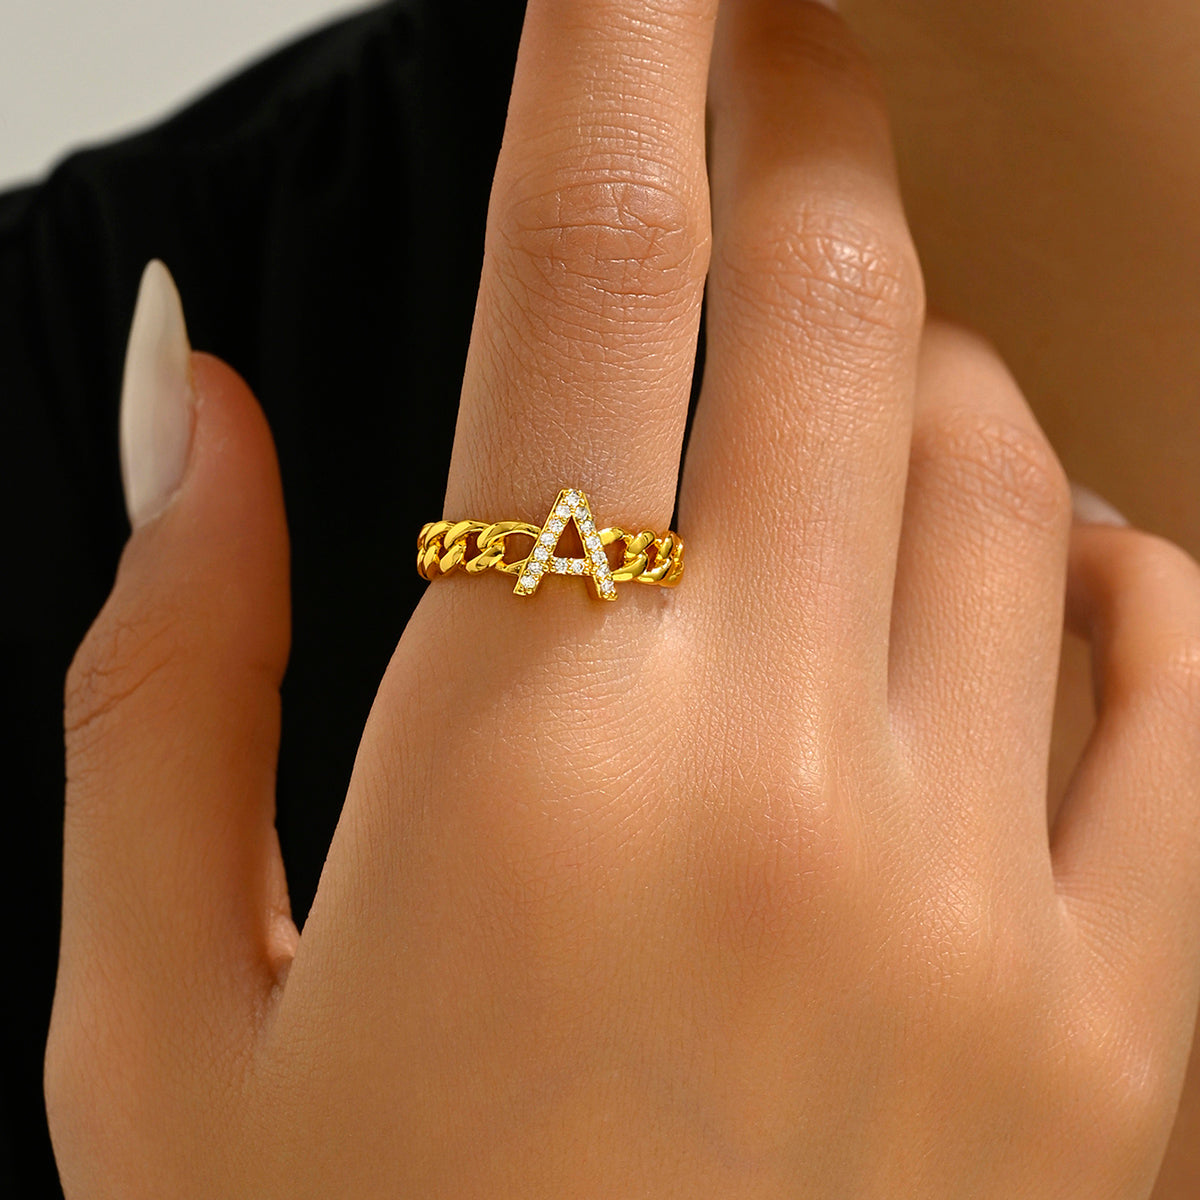 BahGems™ European And American Fashion Chain Design English Letter Ladies, Choose The First Letter Of Your Name, Open Ring Suitable For Daily Wear As A Gift For Girlfriend, Best Friend, Wife